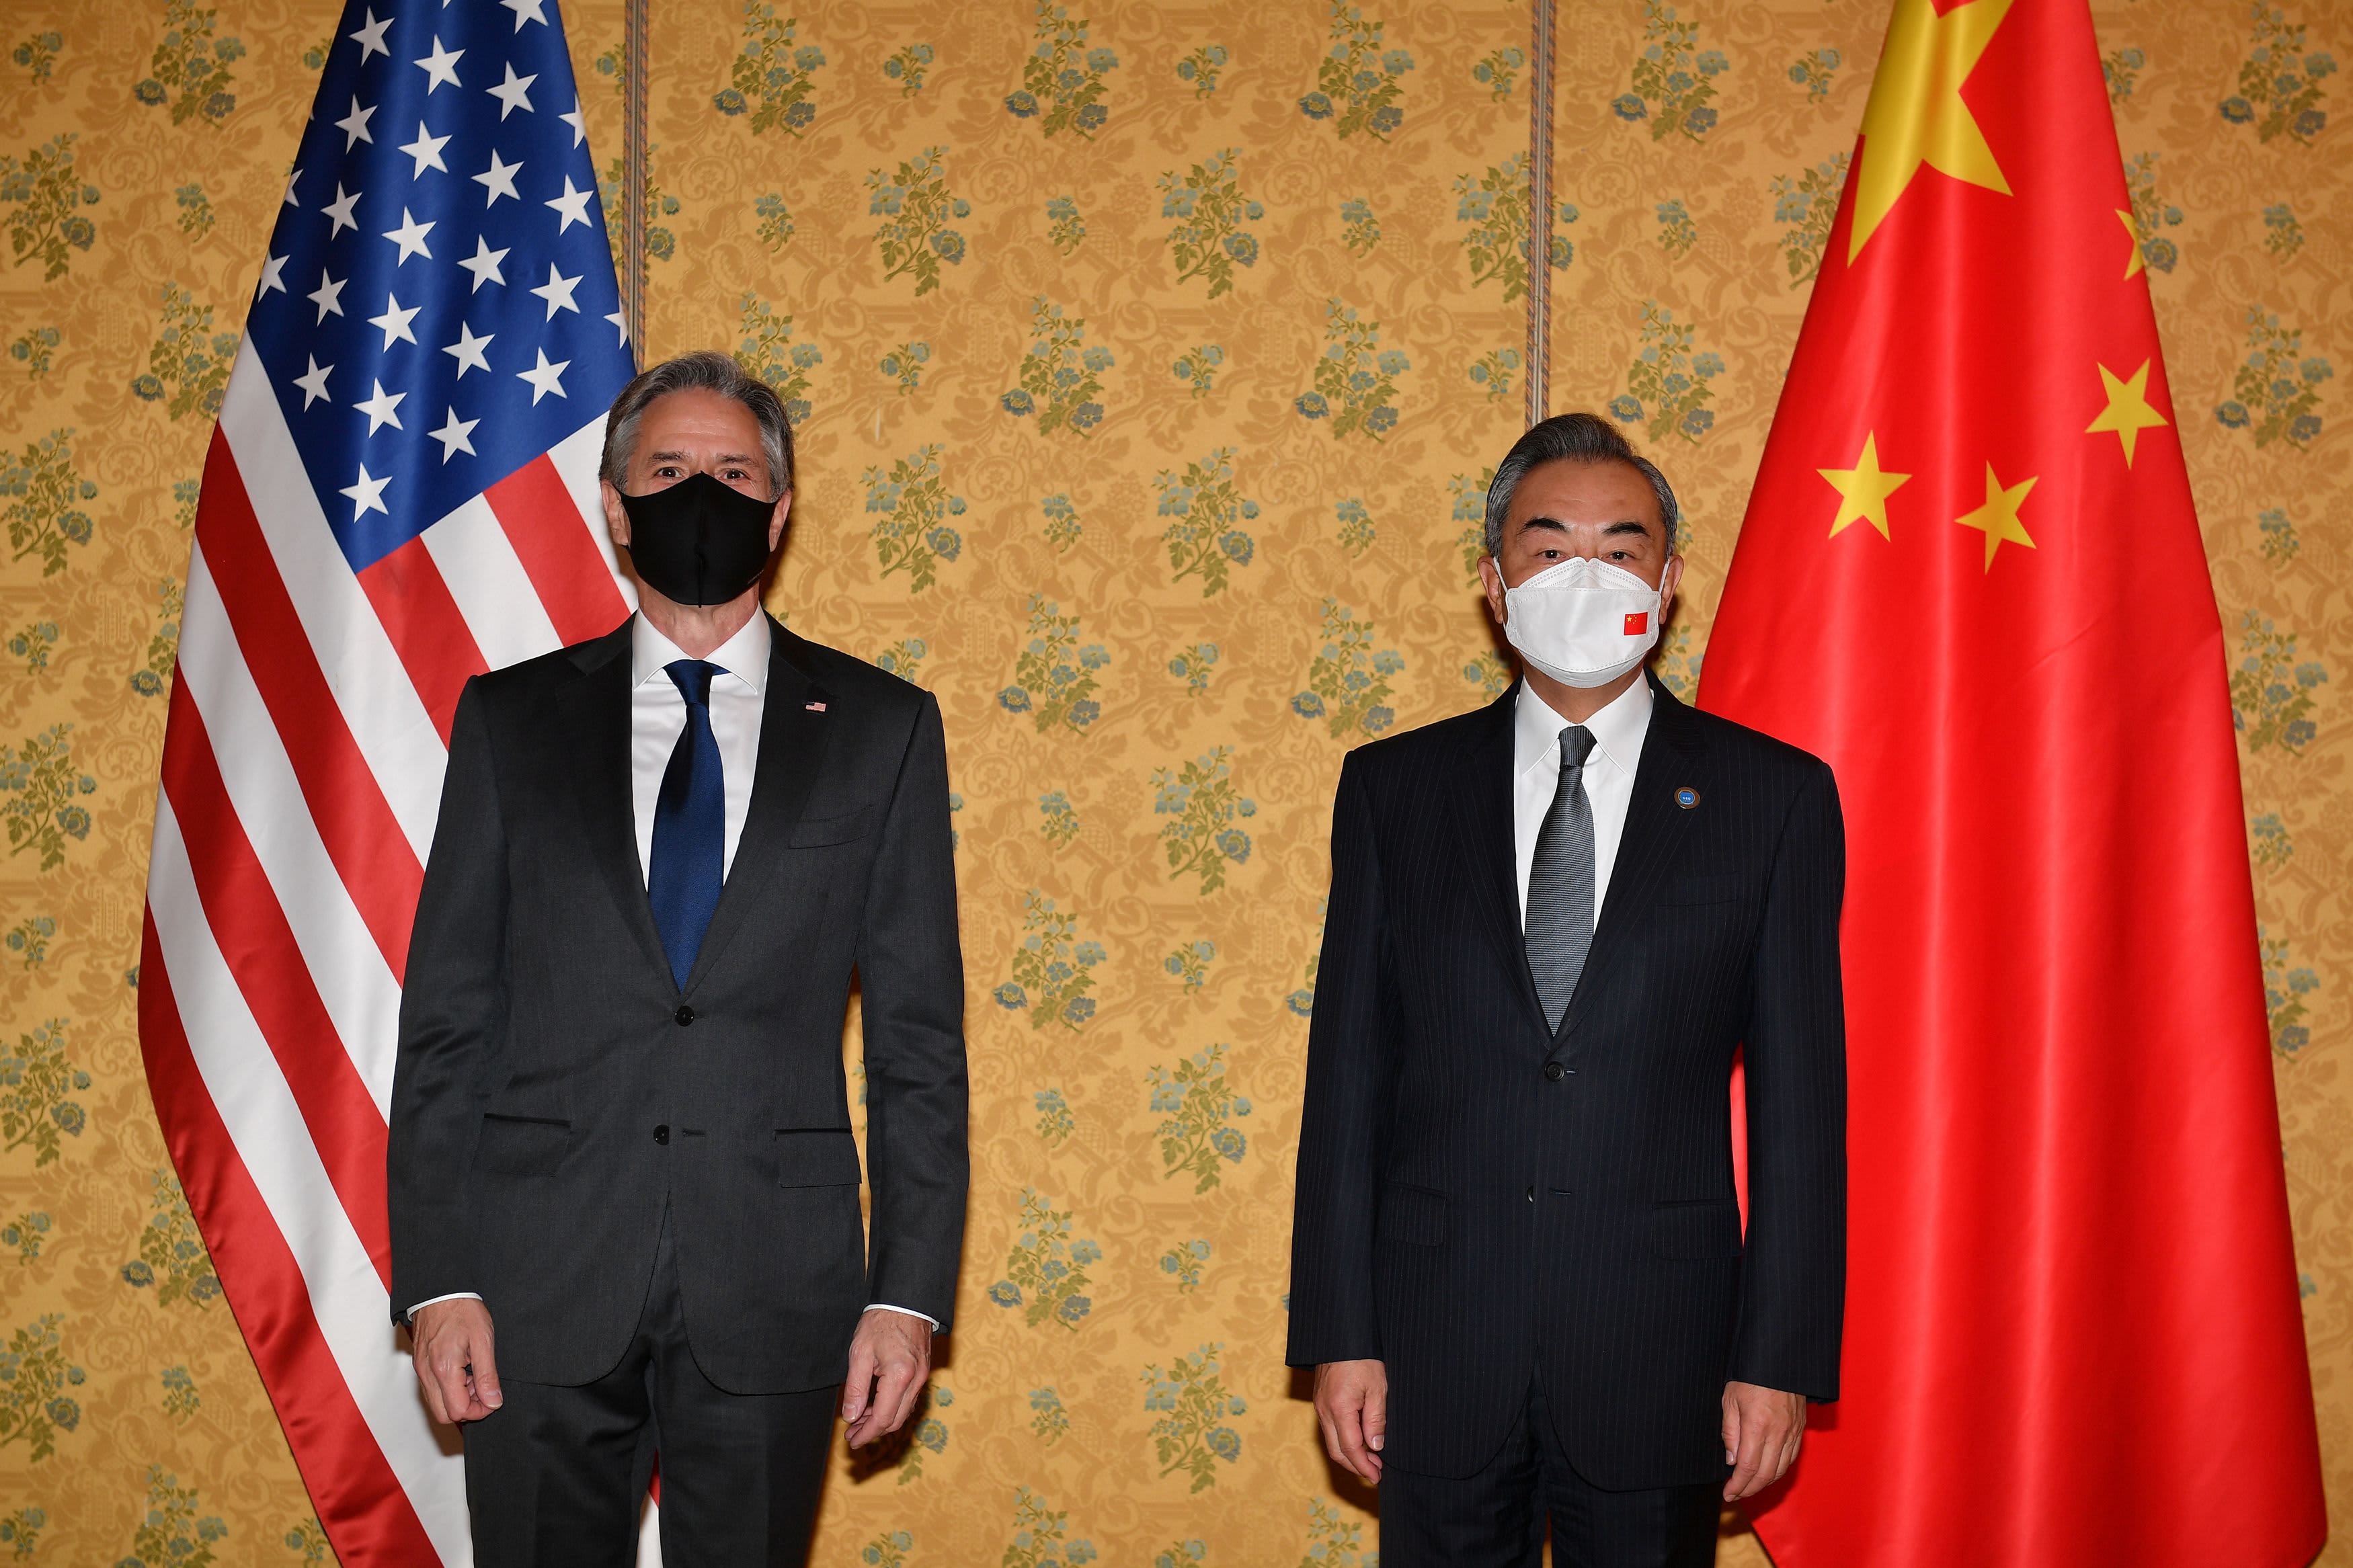 China's Foreign Minister Wang speaks with U.S. Secretary of State Blinken about Ukraine